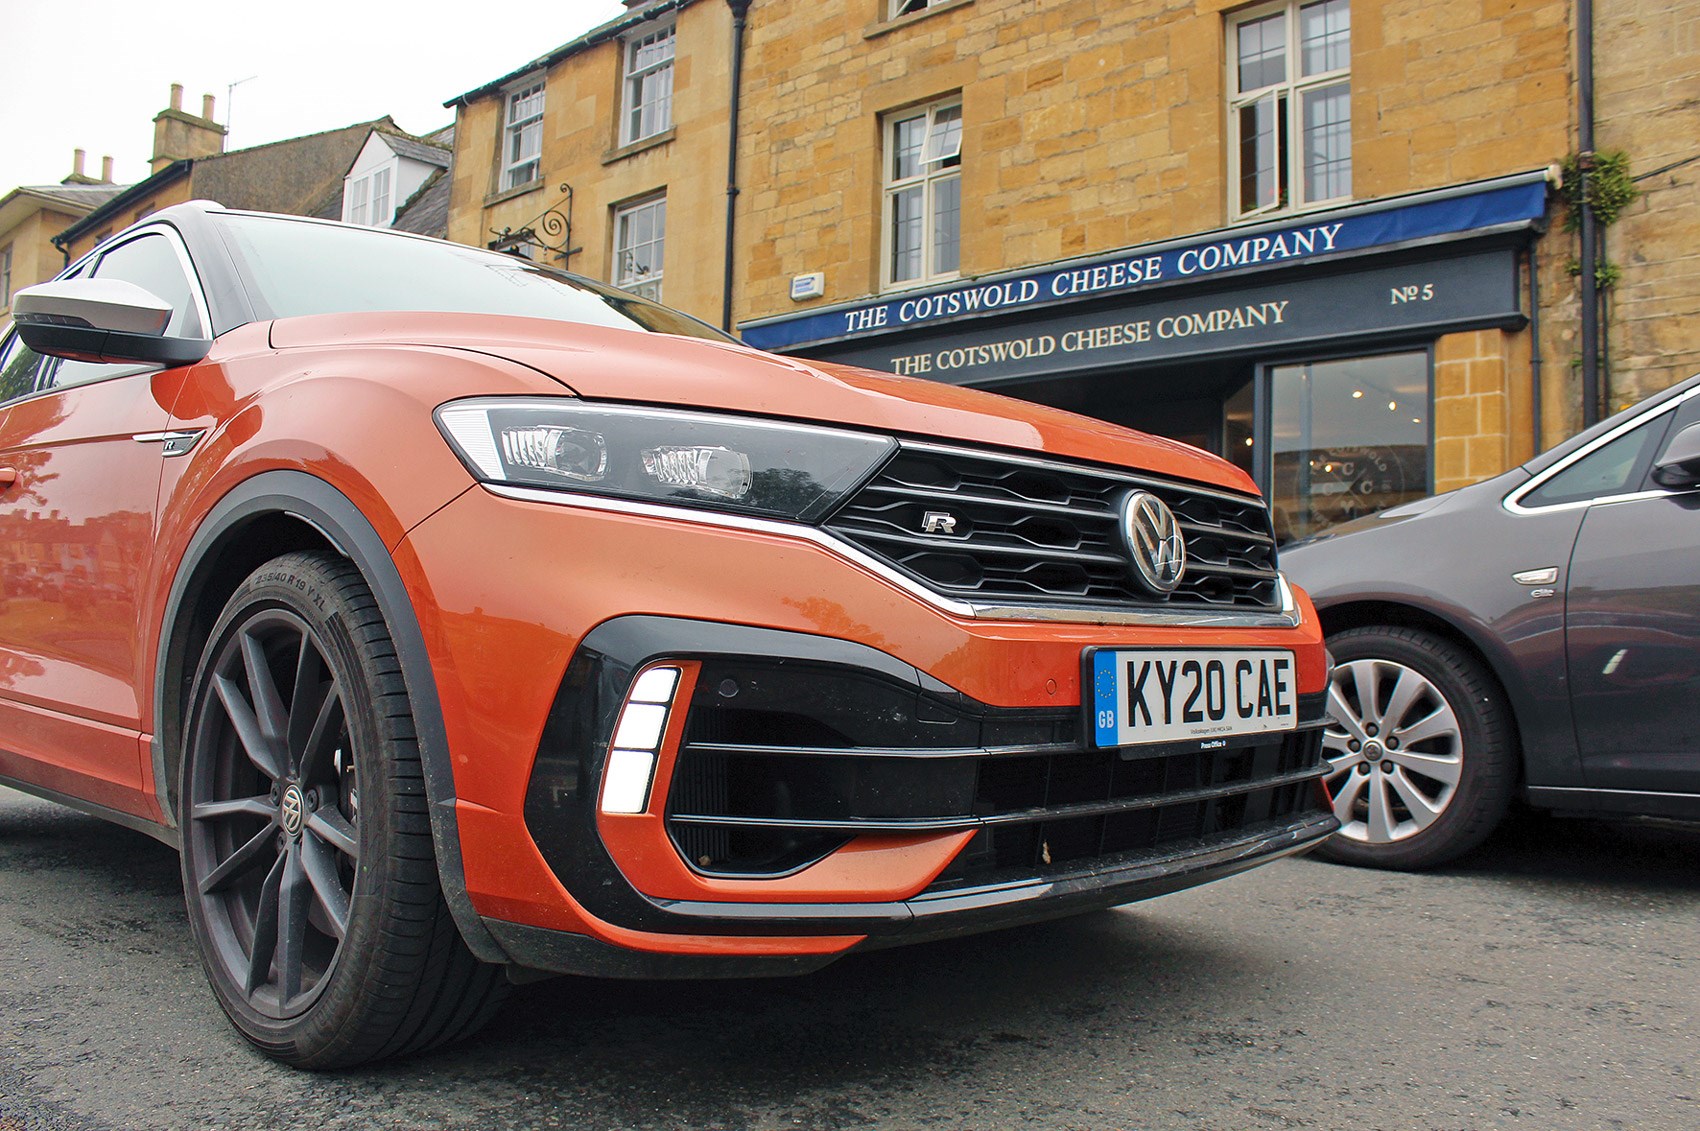 Volkswagen T-Roc R: hot compact SUV on sale from £38,450